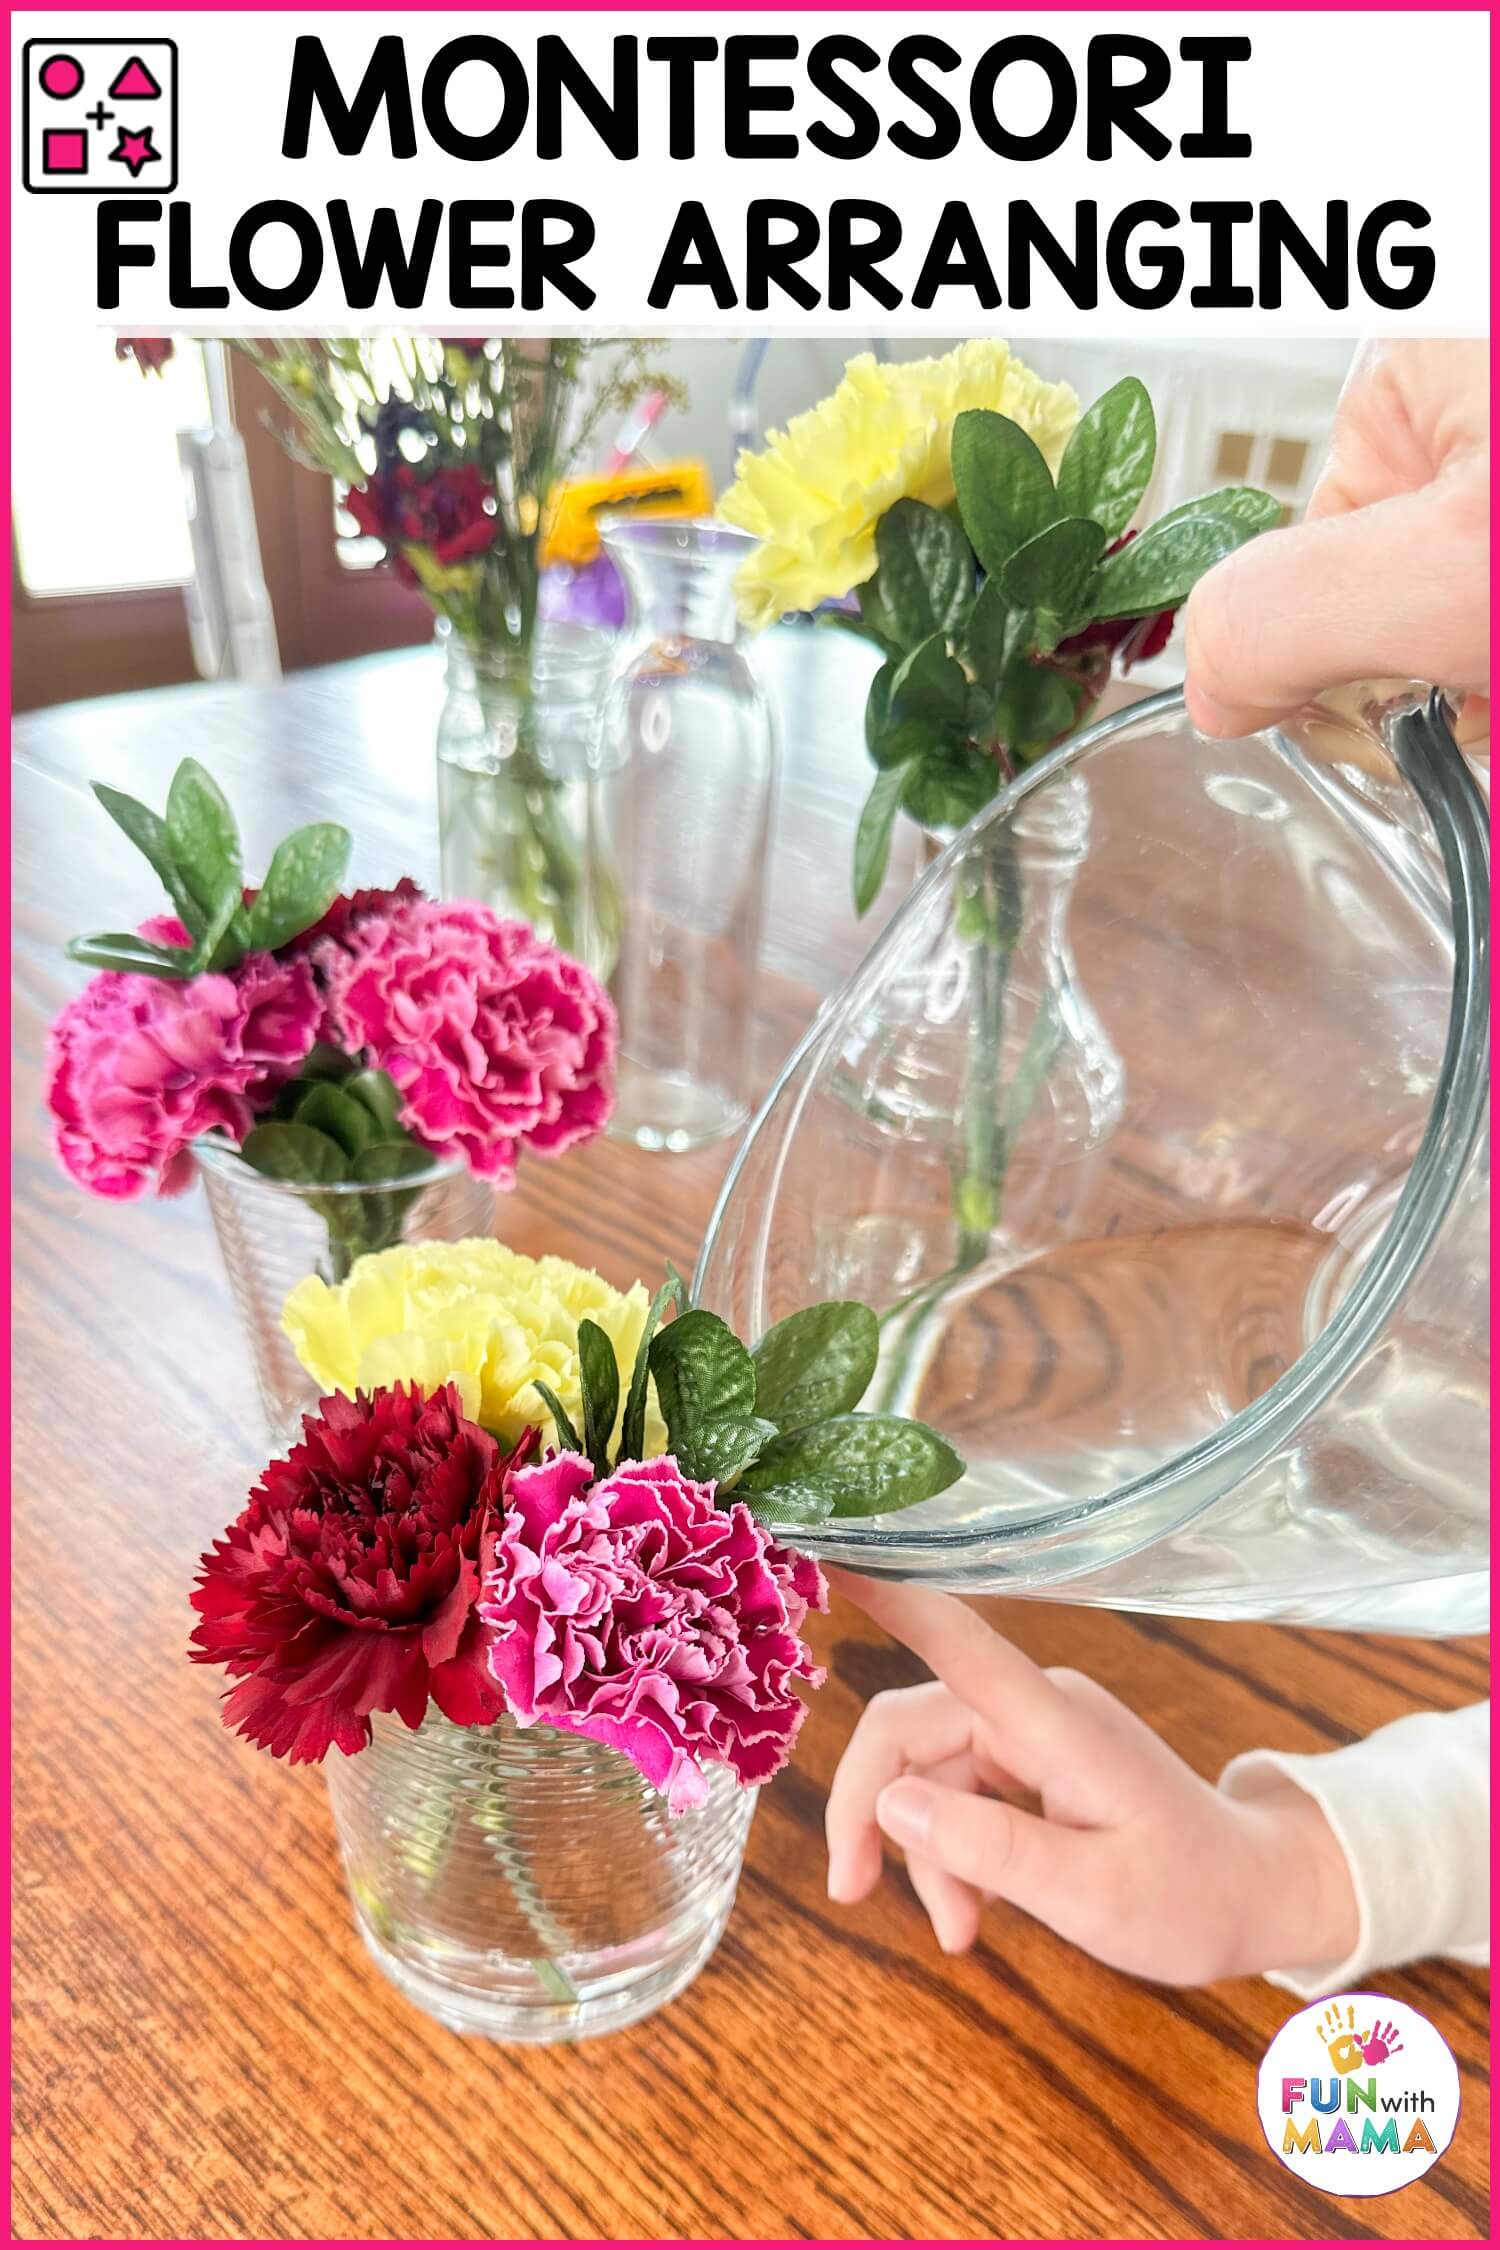 montessori flower arranging with real flowers